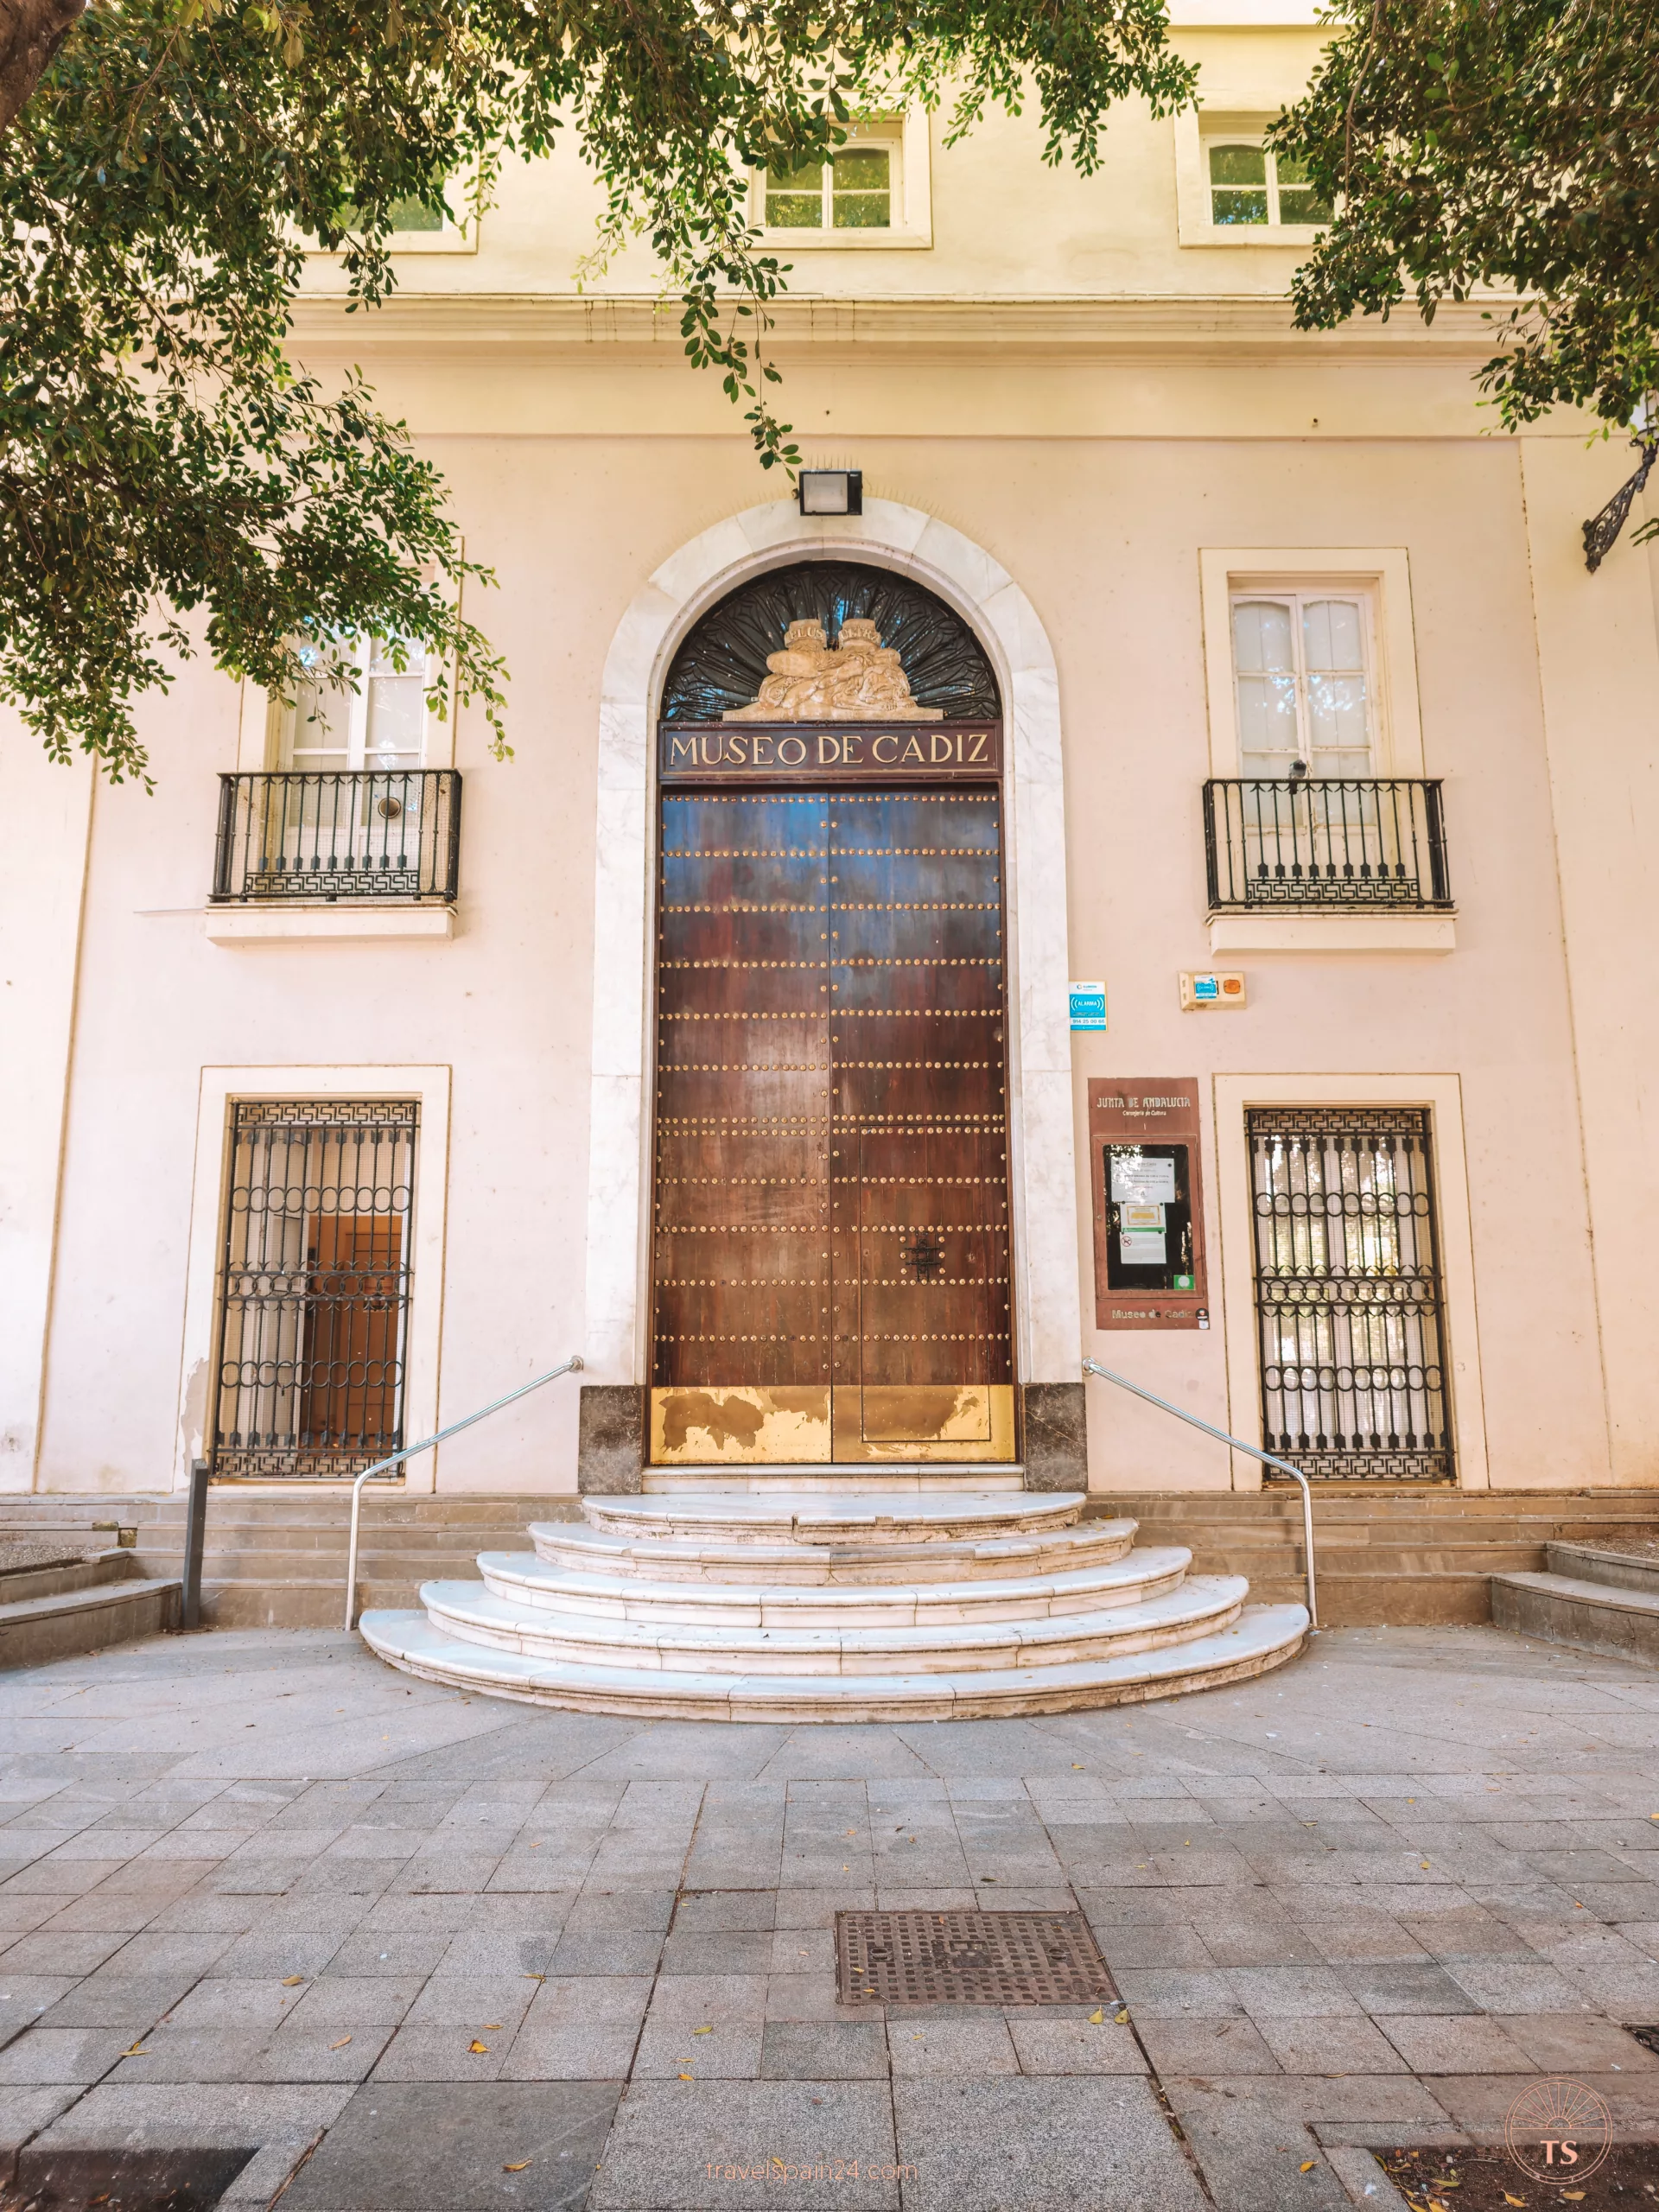 View of the majestic entrance and staircase of the Cadiz Museum. This image offers a glimpse into the cultural richness of Cadiz, a featured stop on the one-day itinerary for exploring the city's highlights.